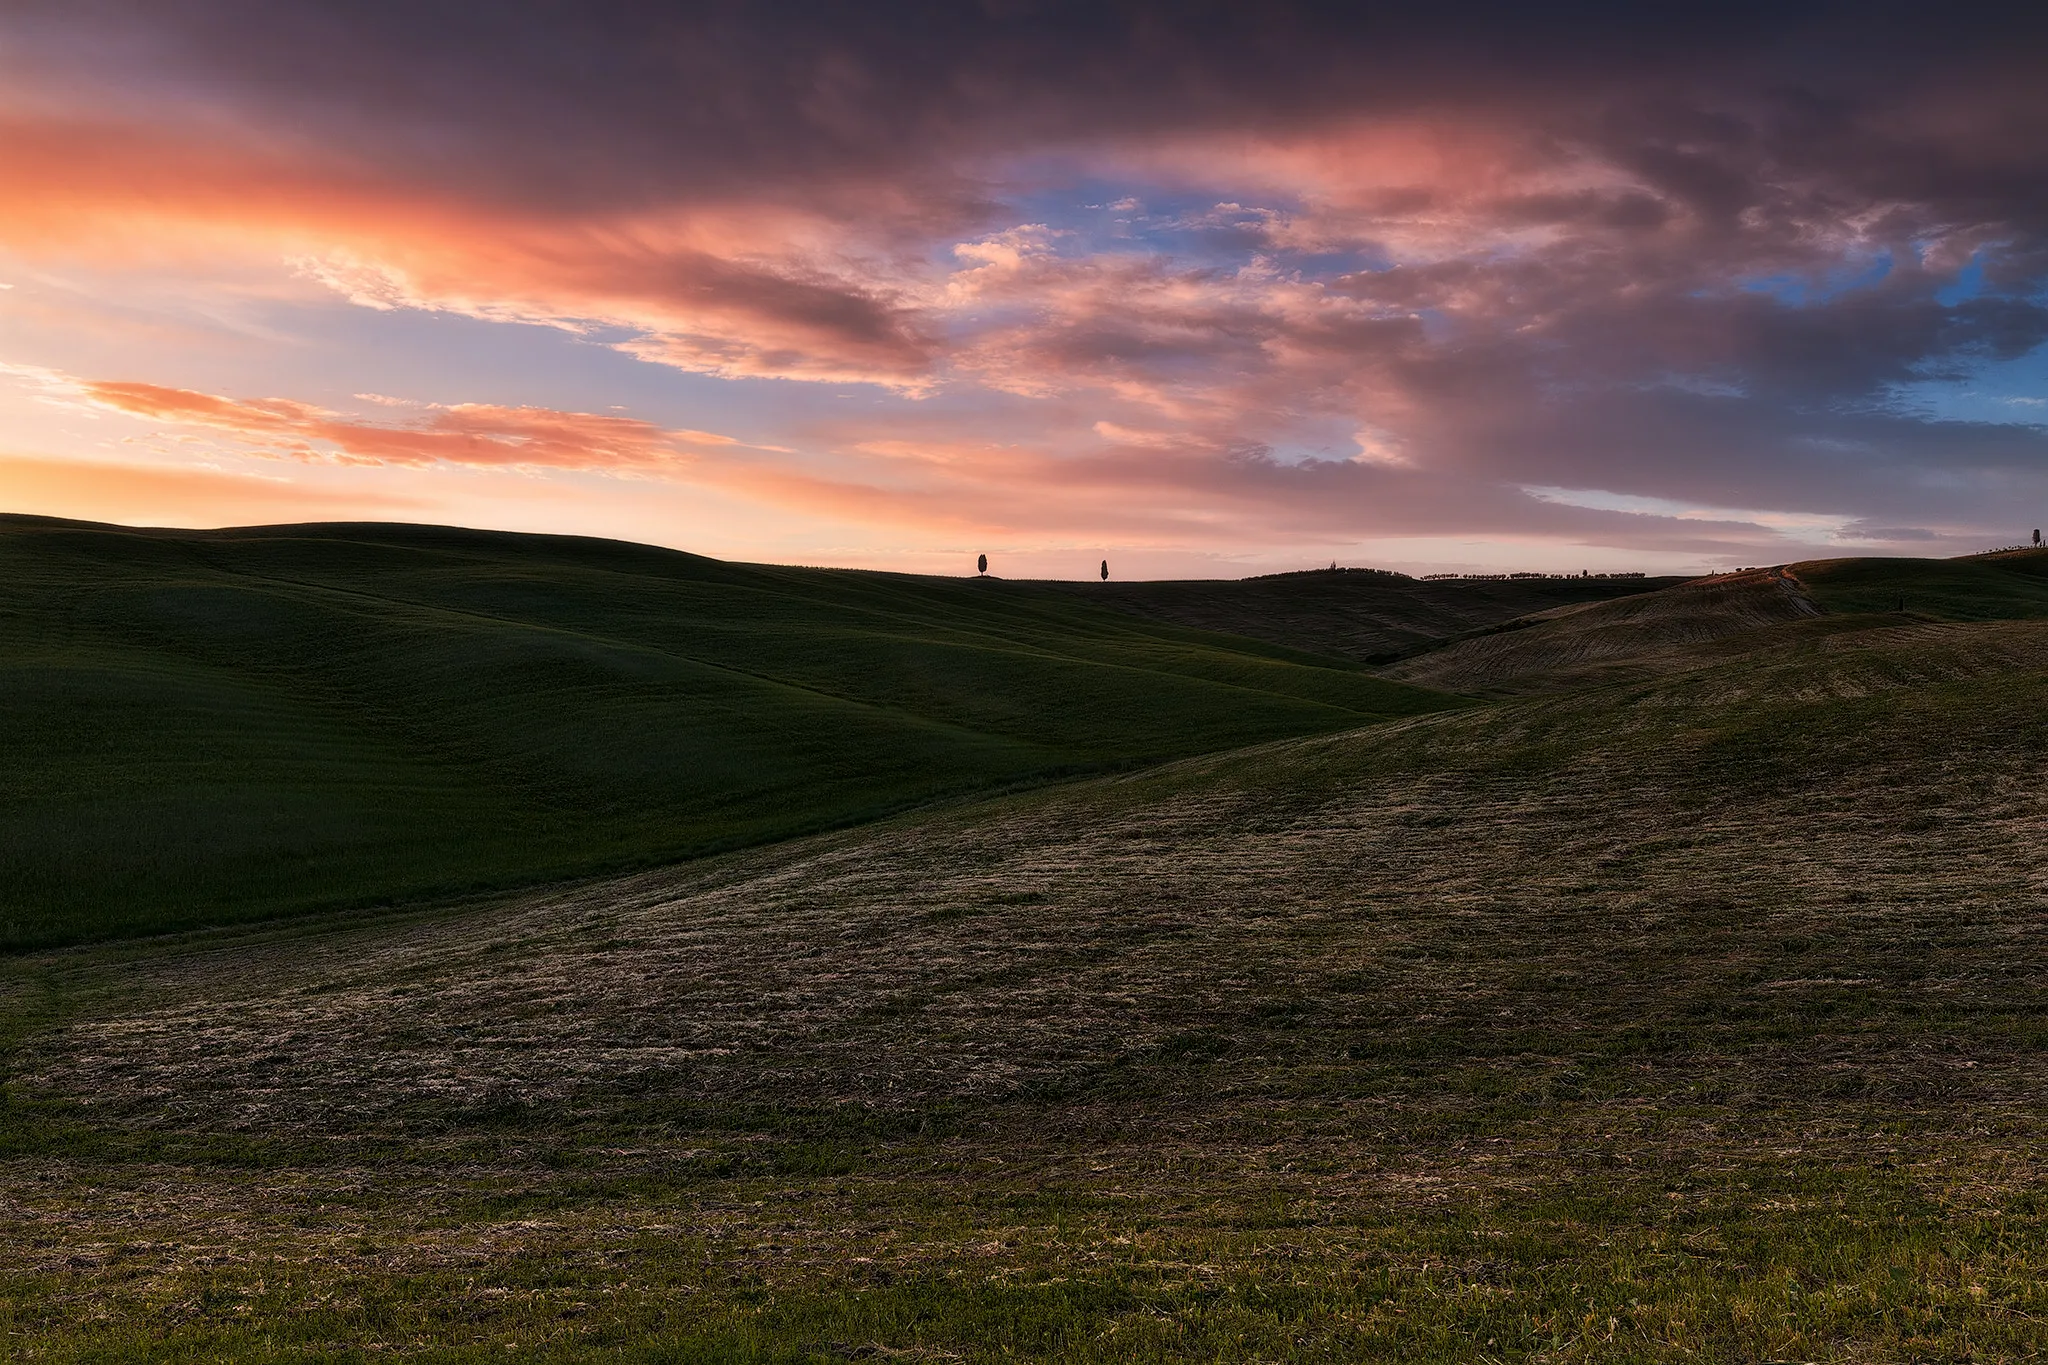 Photo showing: 500px provided description: Nisi GND 0,9 softgrad for the sky [#sky ,#landscape ,#sunset ,#spring ,#nature ,#contrast ,#sunlight ,#italy ,#glow ,#shadow ,#colors ,#green ,#details ,#countryside ,#soft ,#hills ,#rural ,#warm colors ,#tuscany ,#warm light ,#red sky ,#burning sky ,#val d'orcia ,#purple sky ,#torrenieri ,#warm tones ,#san quirico]